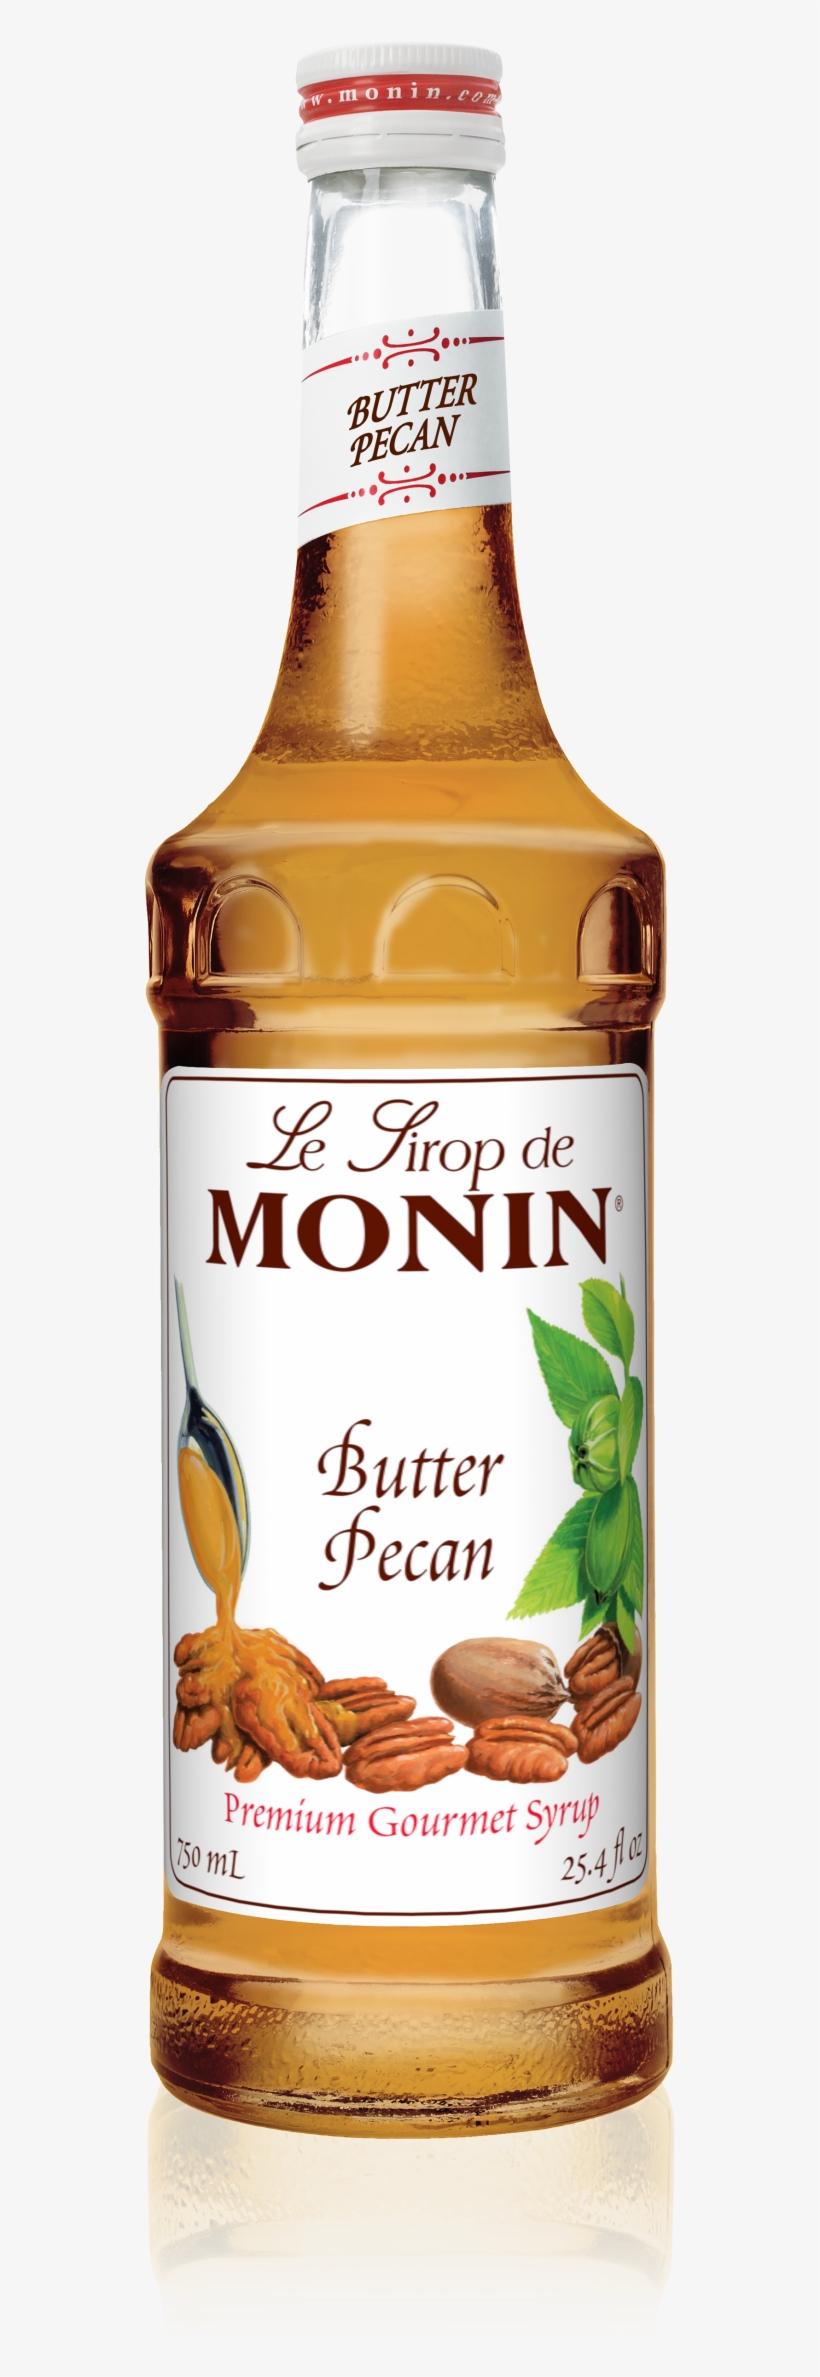 750 Ml Butter Pecan Syrup - Monin Butter Pecan Syrup 750 Ml, transparent png #1023484